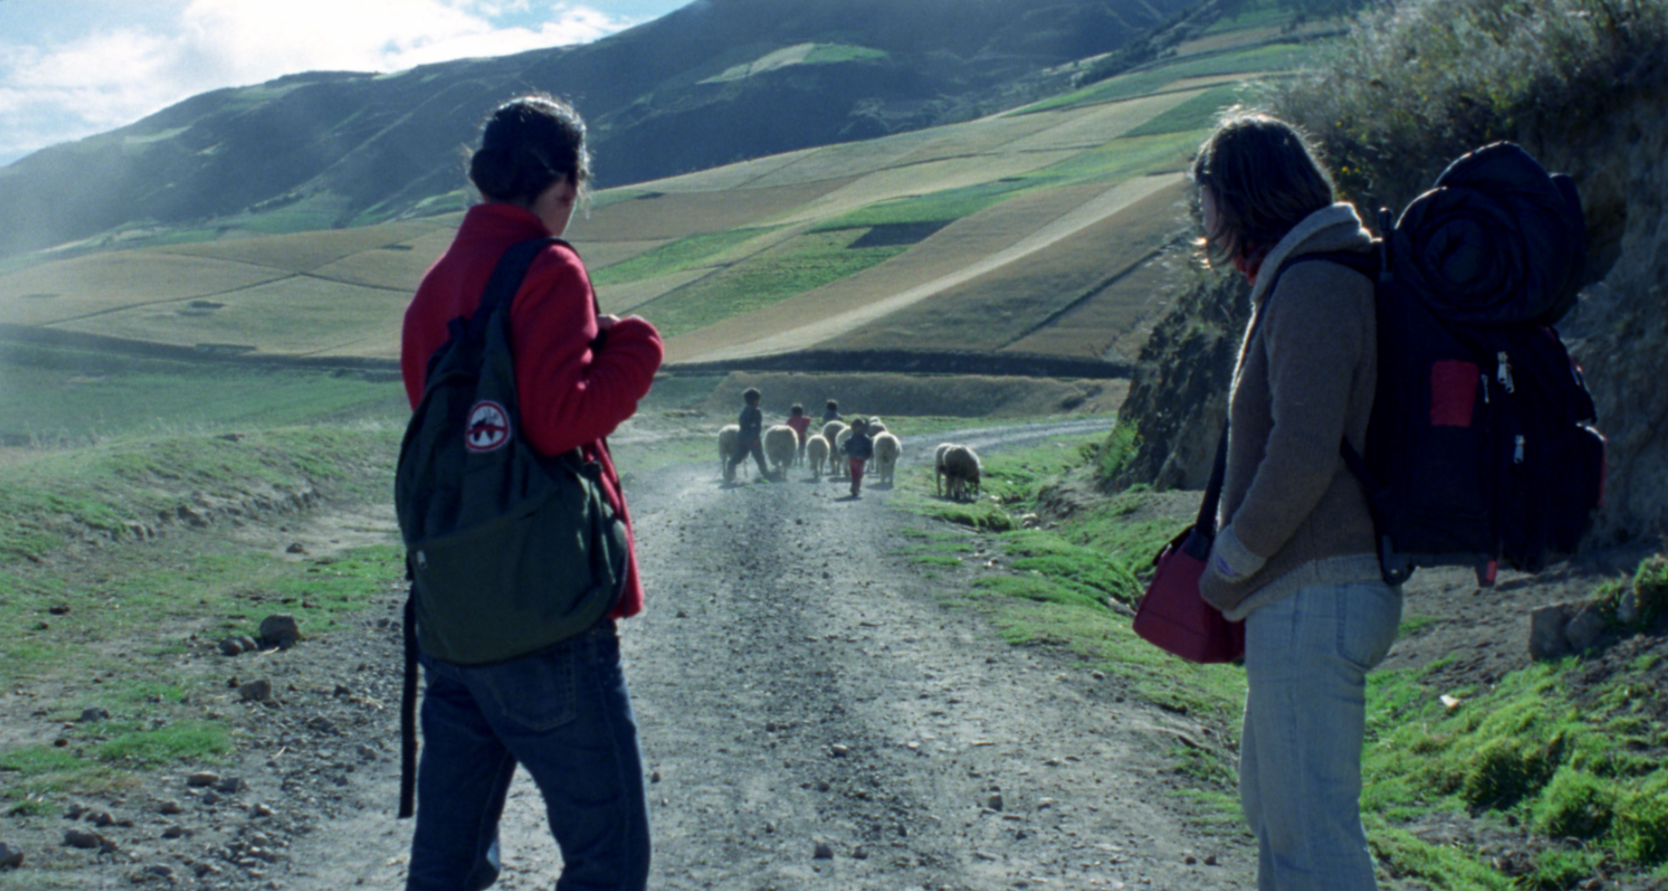 Two hikers observe a small herd of sheep and several children walking down a dusty road